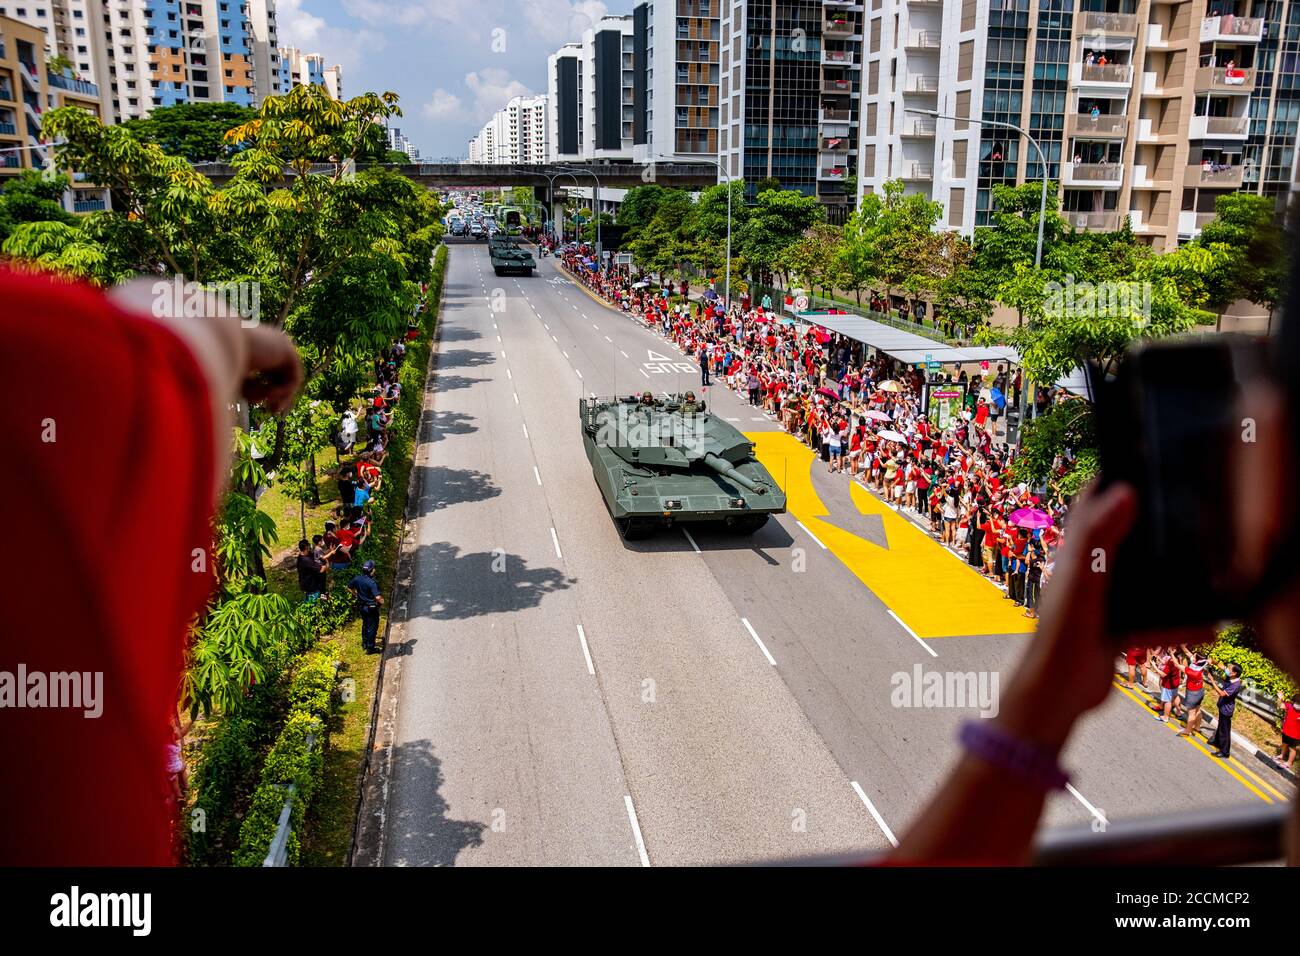 SINGAPORE, SINGAPORE - Aug 09, 2020: A Leopard 2-SG main battle tank rolls along the streets of Singapore as part of the mobile column display celebra Stock Photo